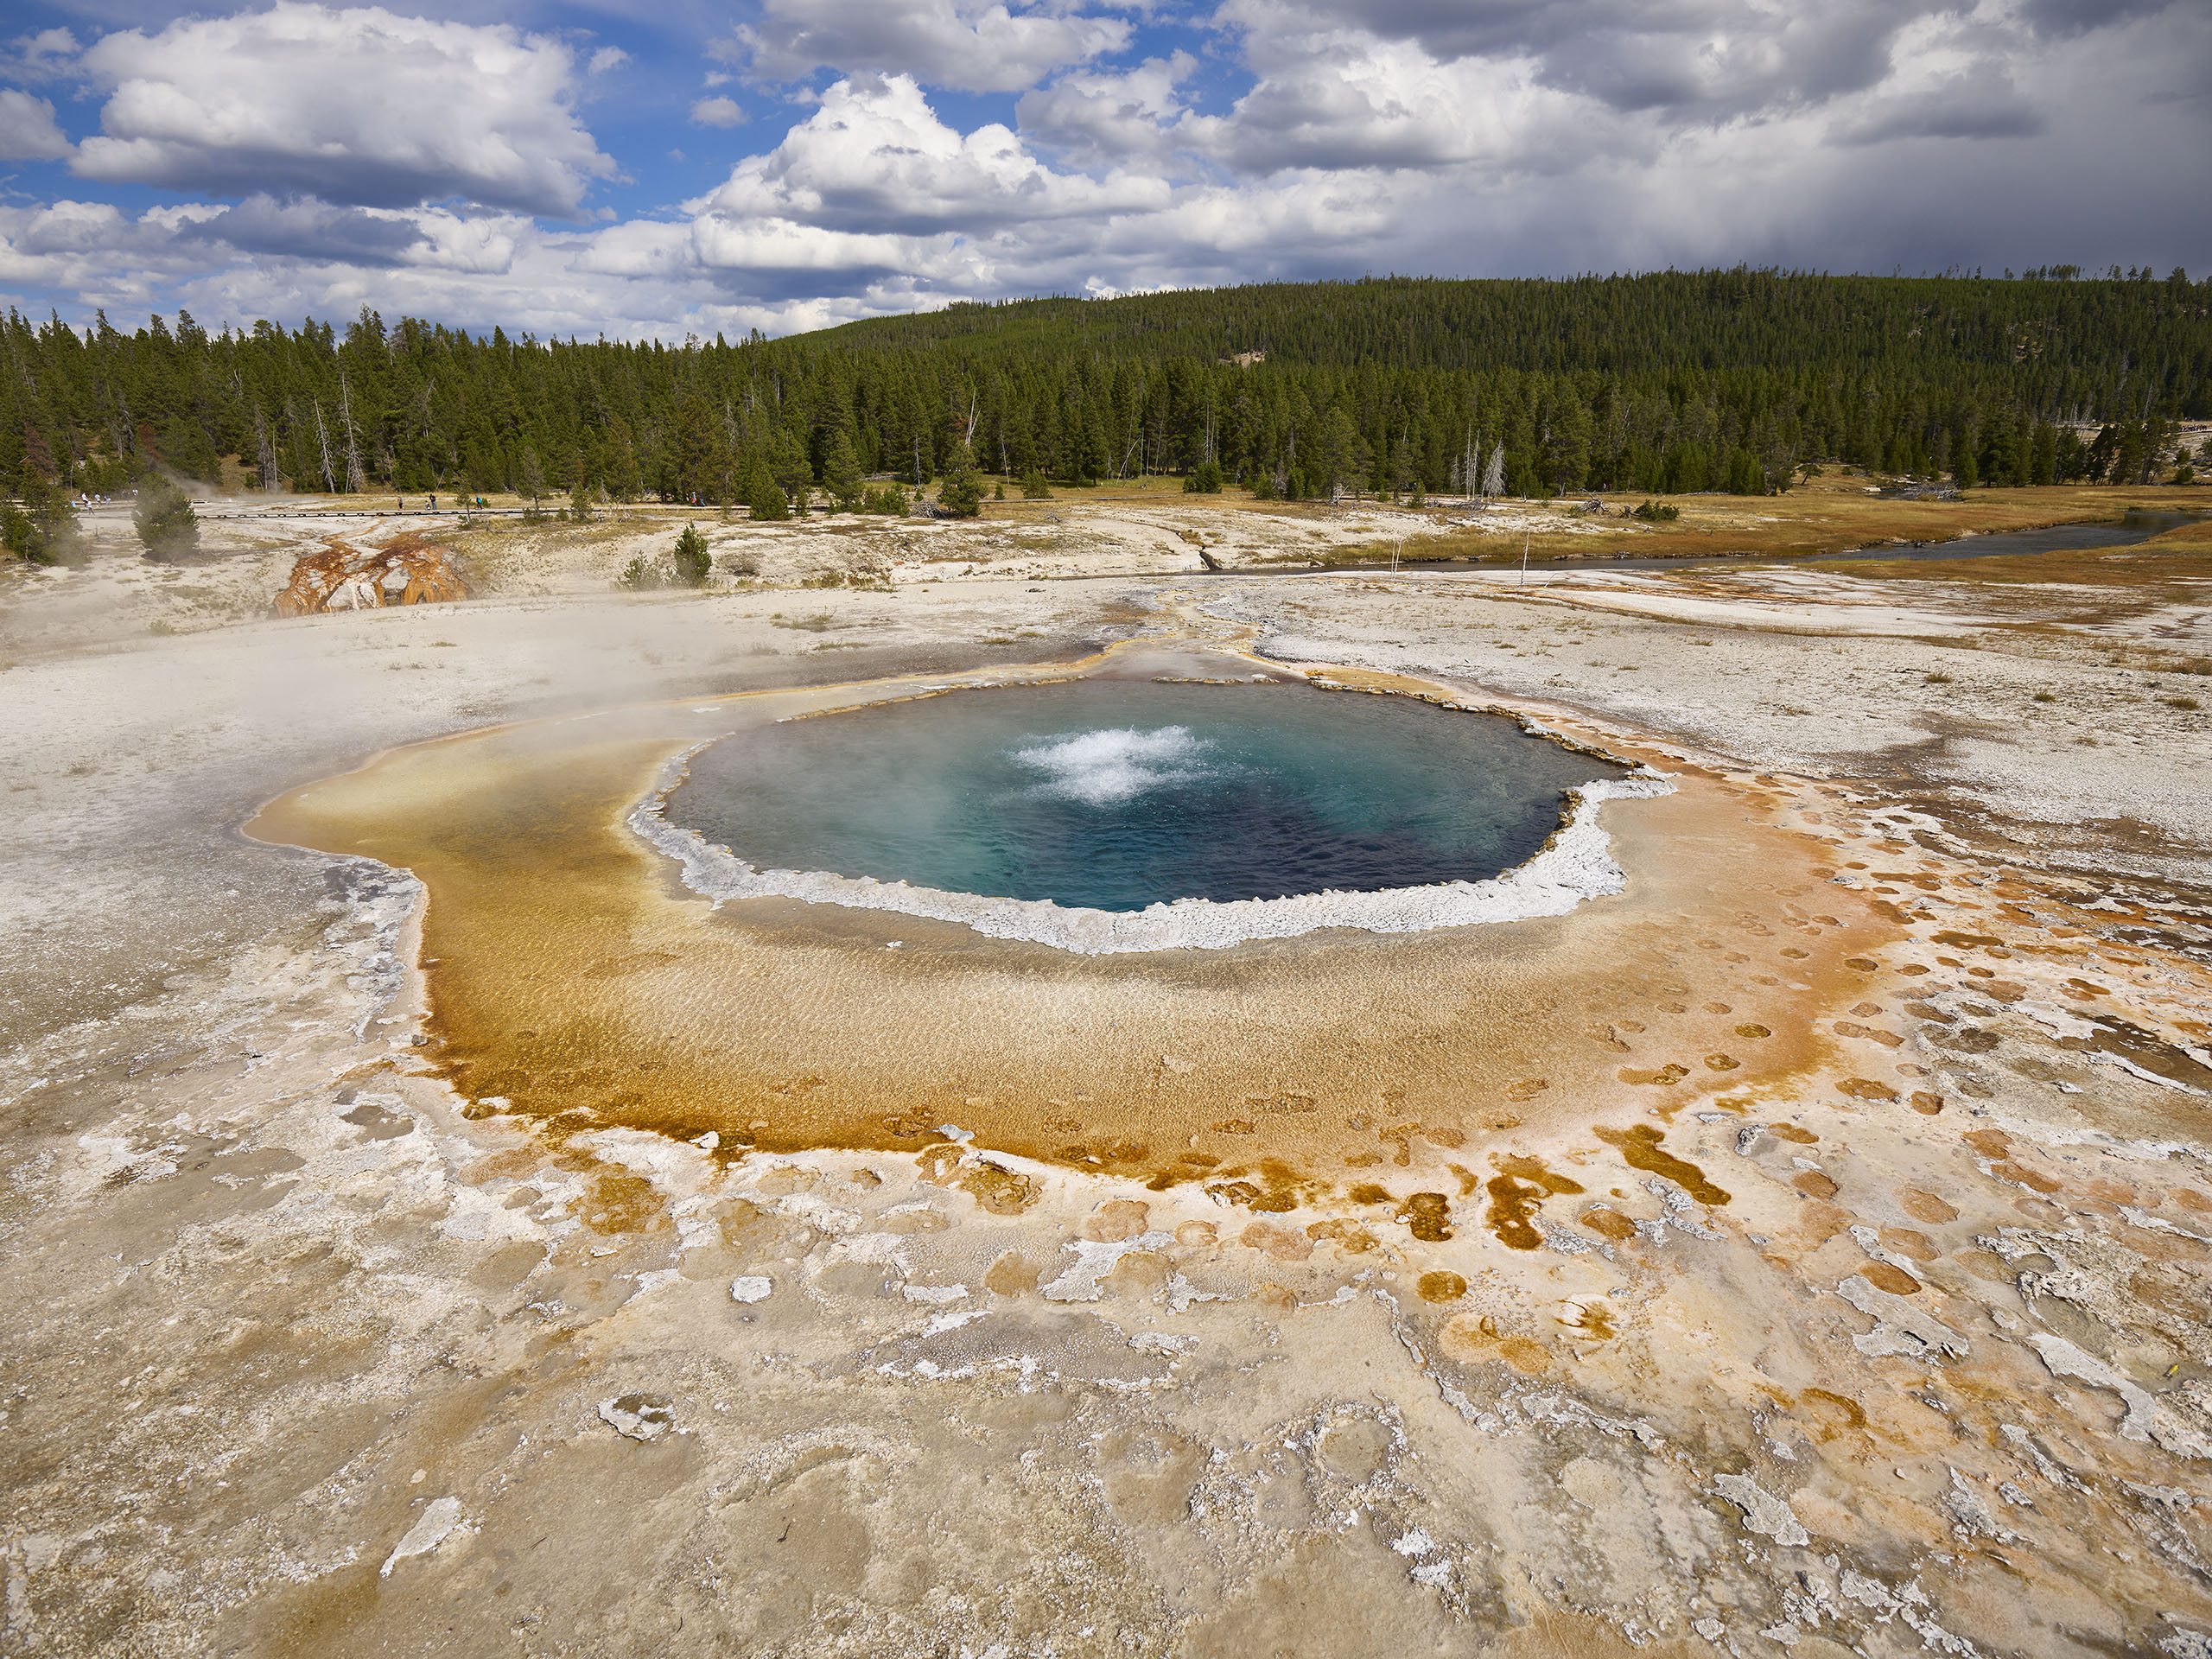 Crested Pool with buffalo footprints Yellowstone National Park